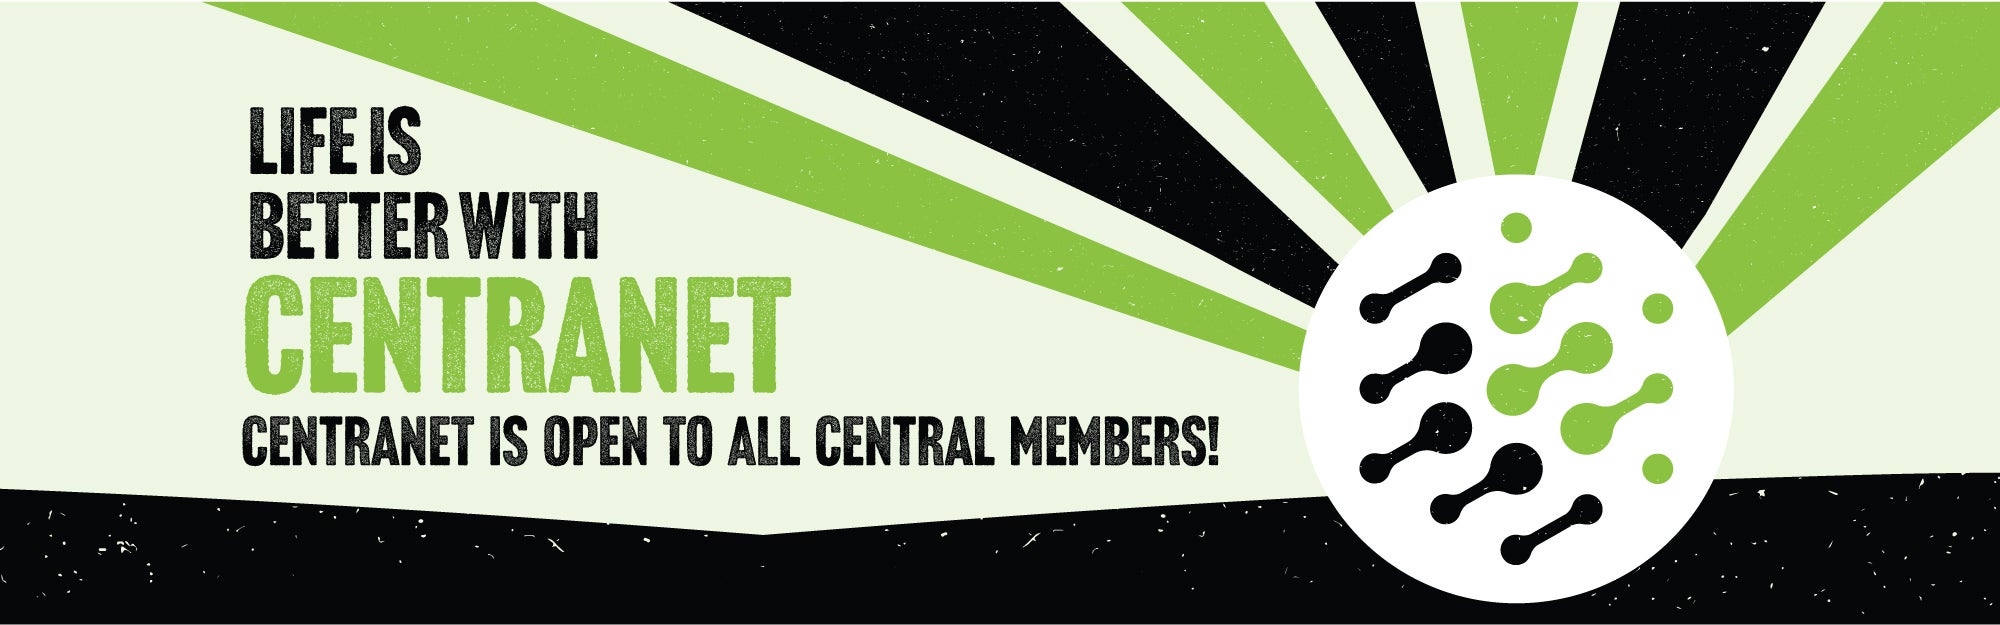 Life is Better with Centranet! Centranet is open to all Central members!